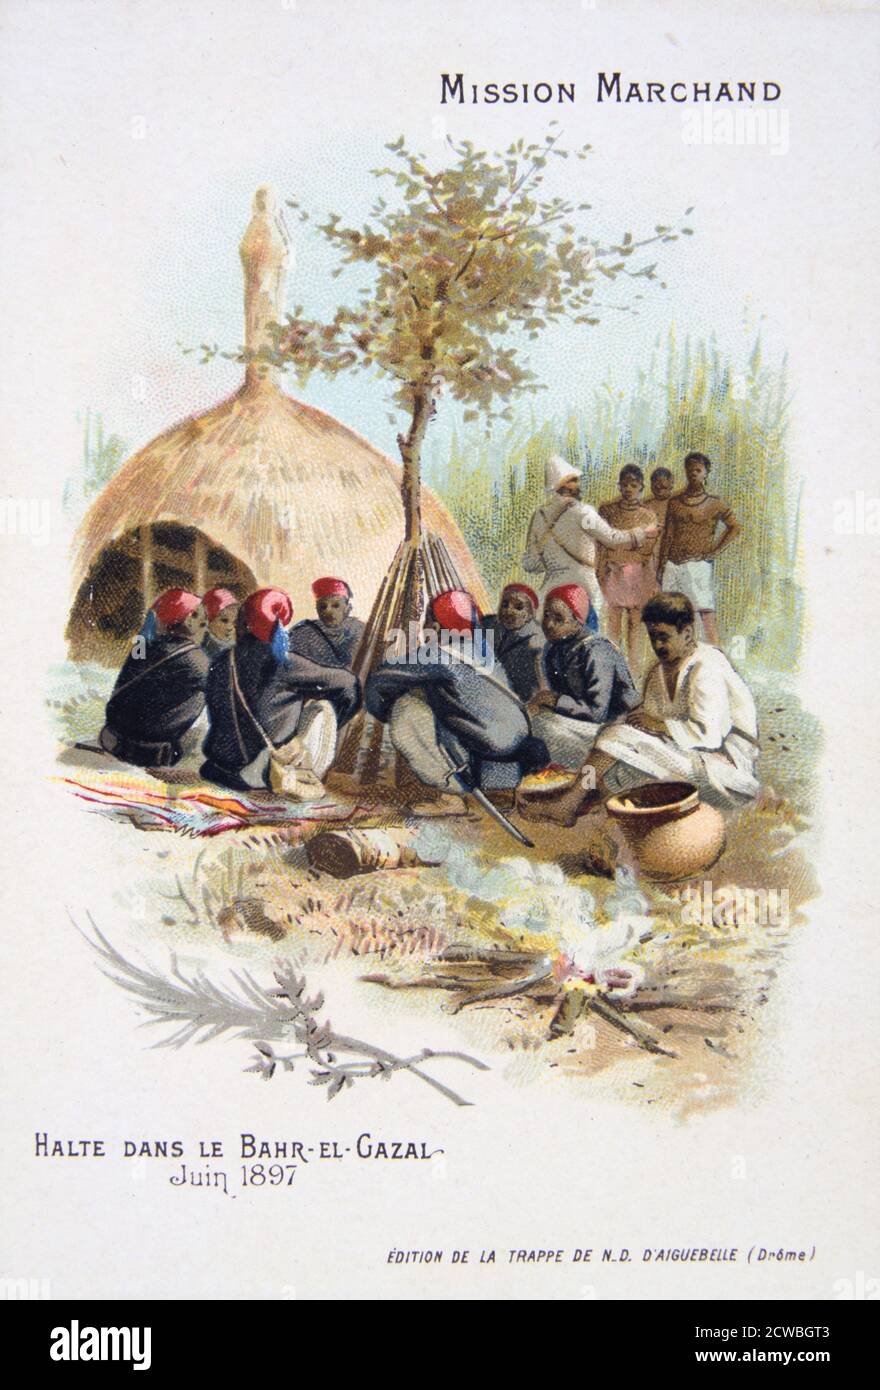 Rest at Bahr-el-Ghazal, June 1897. Scene during a trade mission in Africa in the period of European colonisation. A European and his African porters break their journey. This could have been at the River Bahr-el-Ghazal in what is now Sudan, or the Bahr-el-Ghazal ravine in modern Sudan. At that time large parts of Africa were under French rule. Card produced by the Monastery of Aiguebelle. Stock Photo